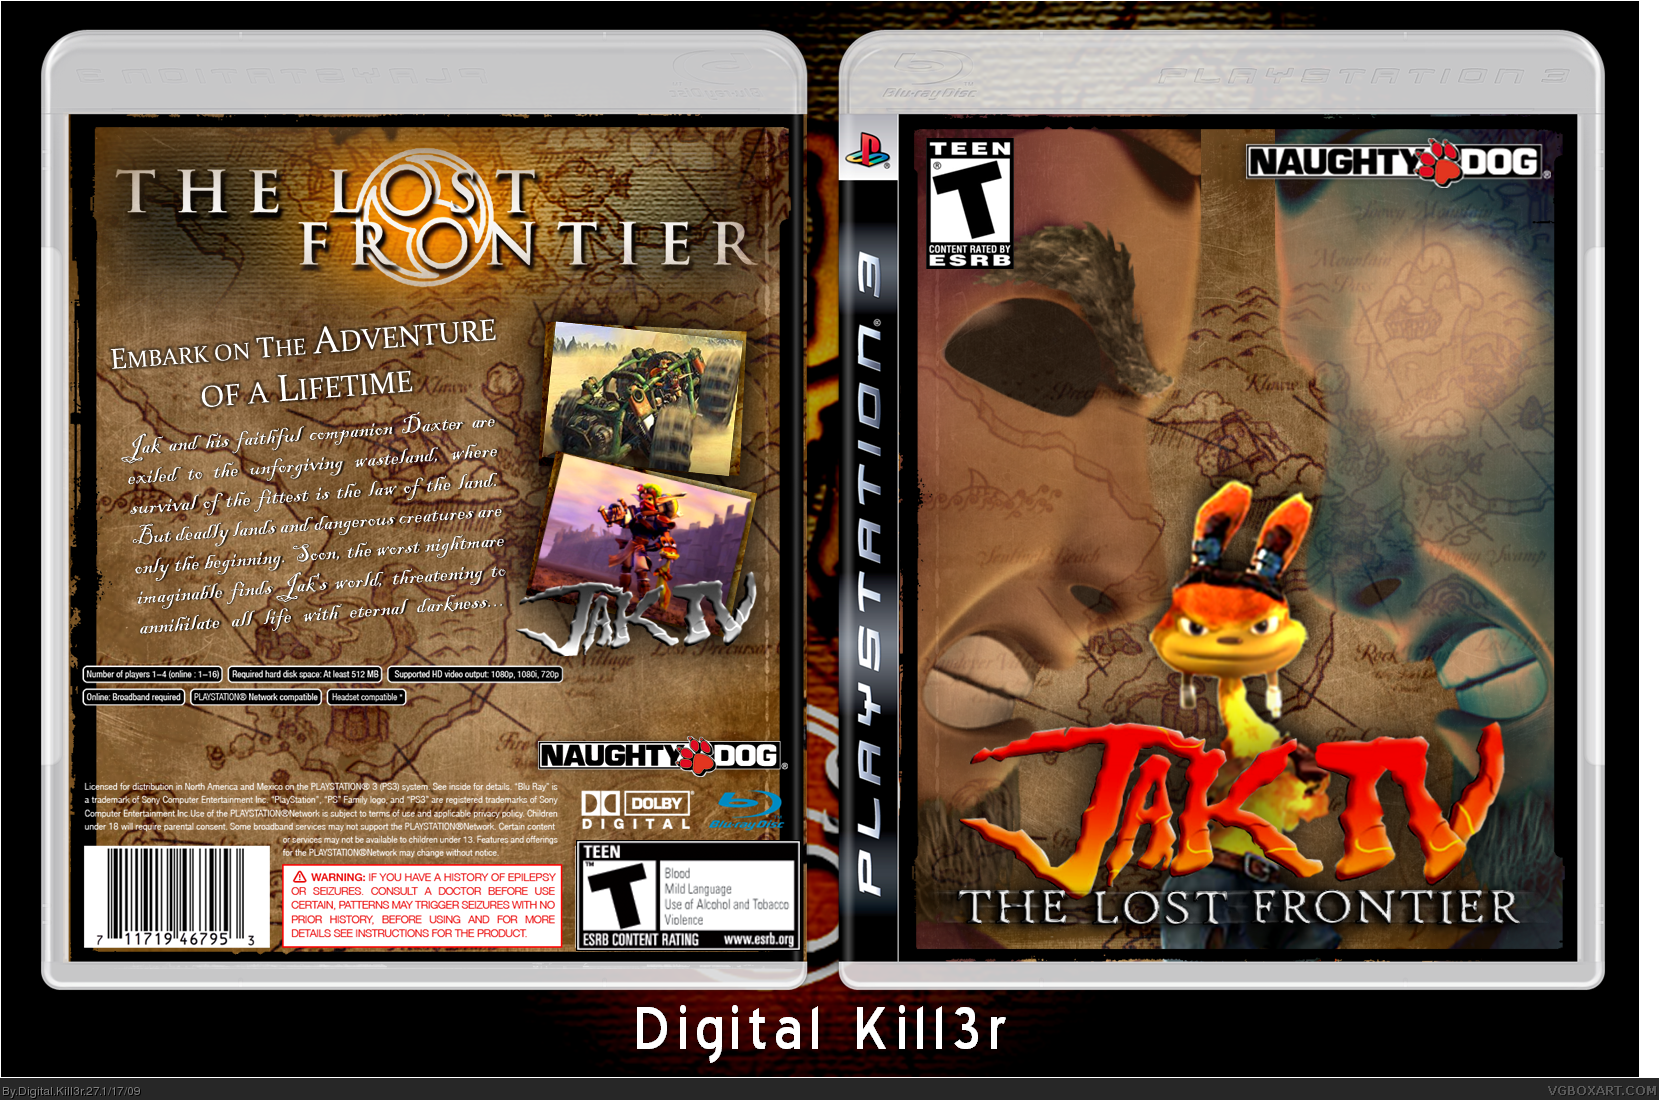 Jak IV: The Lost Frontier box cover